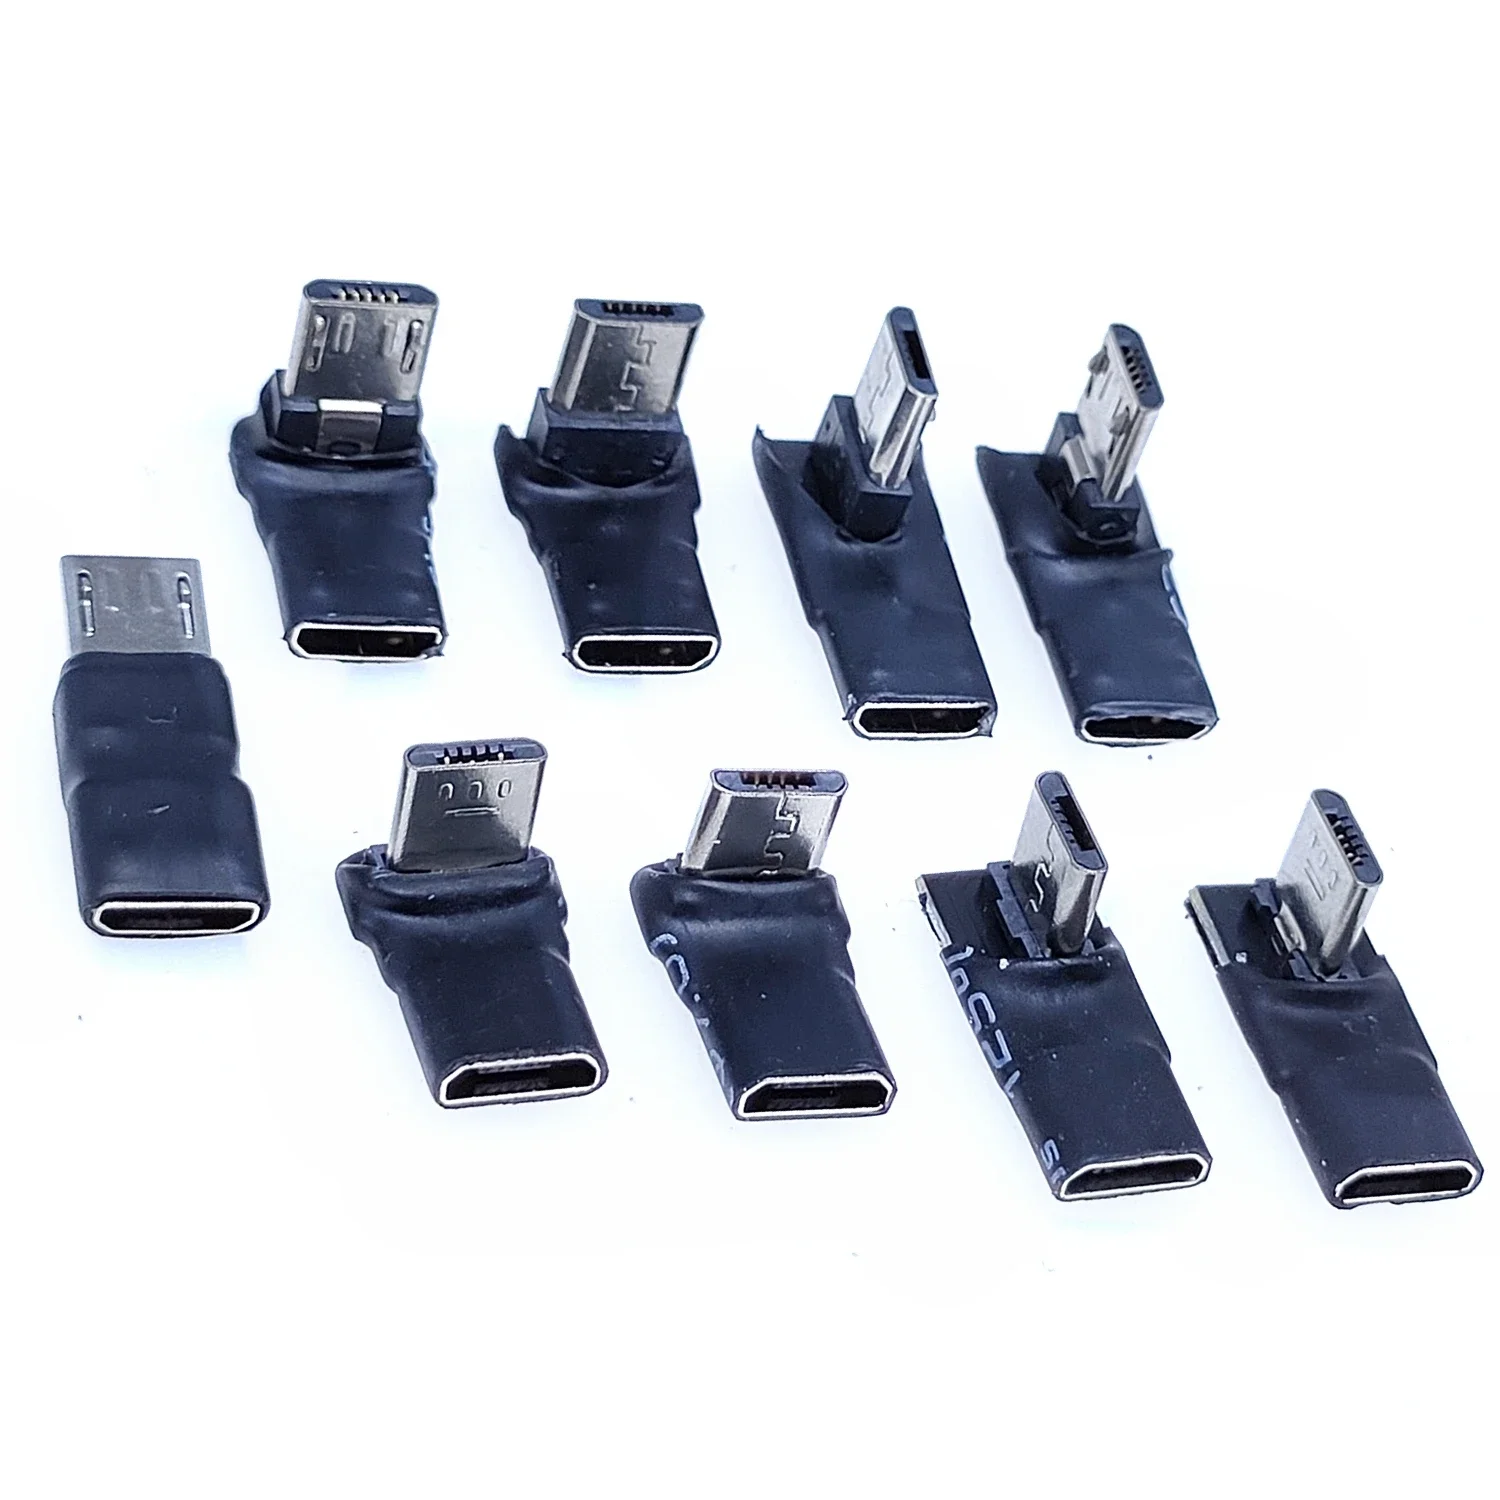 

Ultra short body 90 Degree USB Left and Right and Up and Down Angled Micro 5pin Female to Micro USB Male Data Adapter